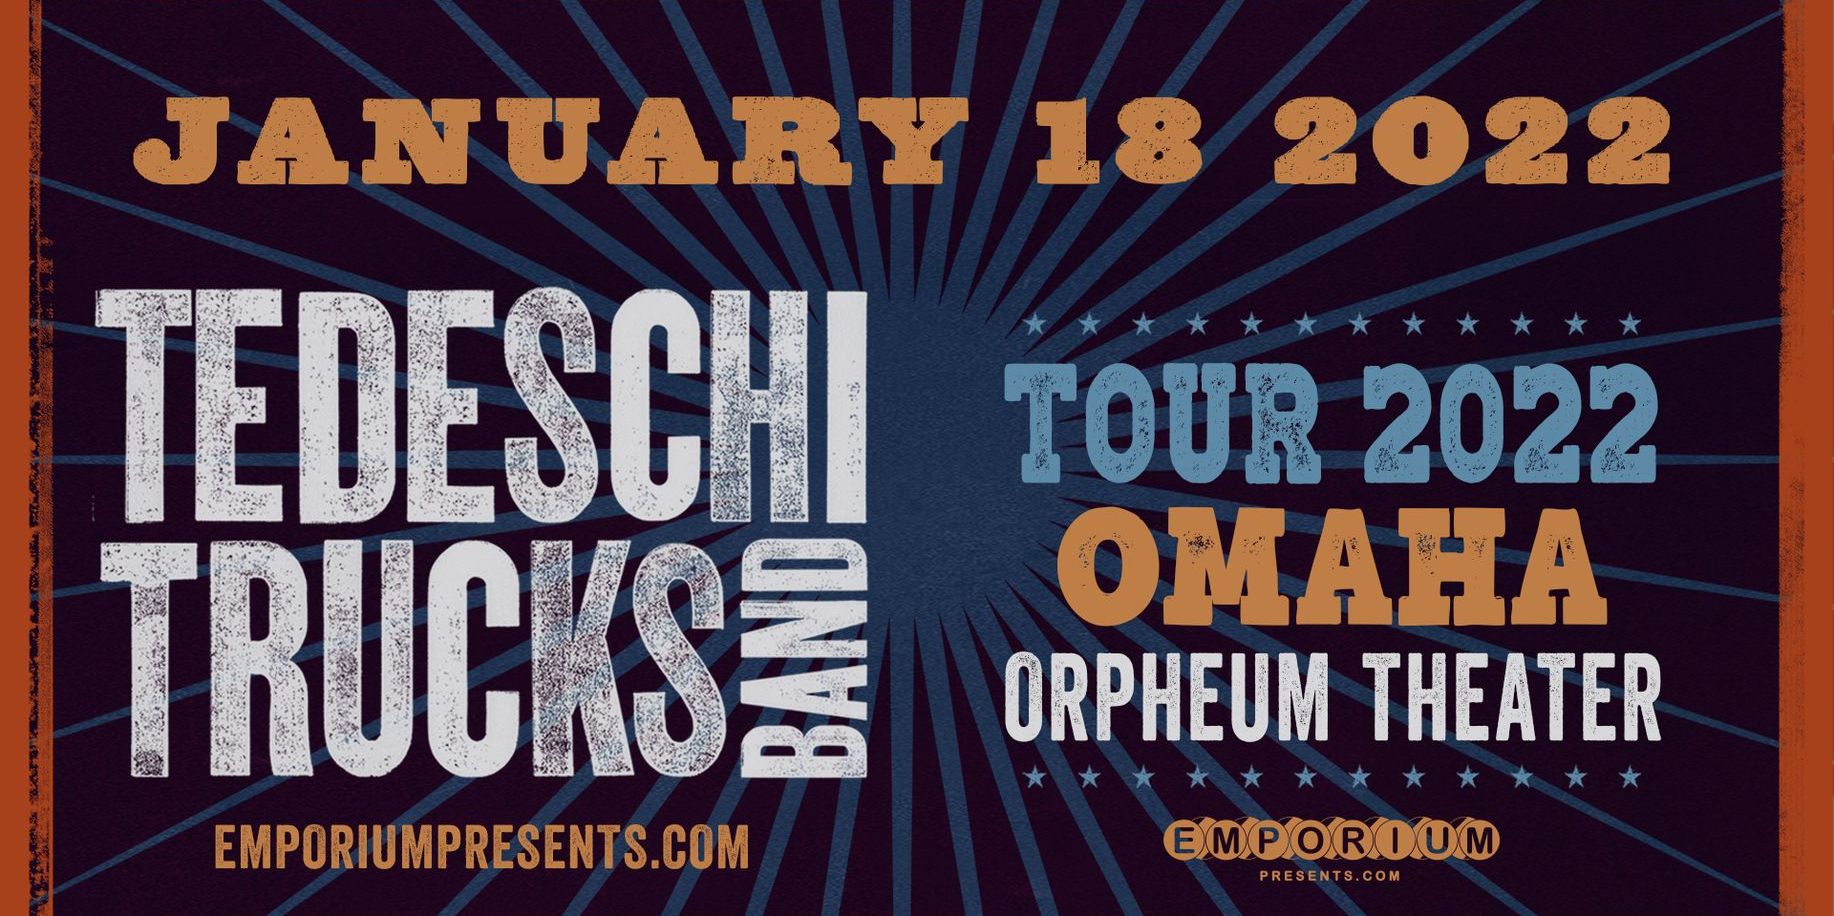 Tedeschi Trucks Band live in Omaha promotional image